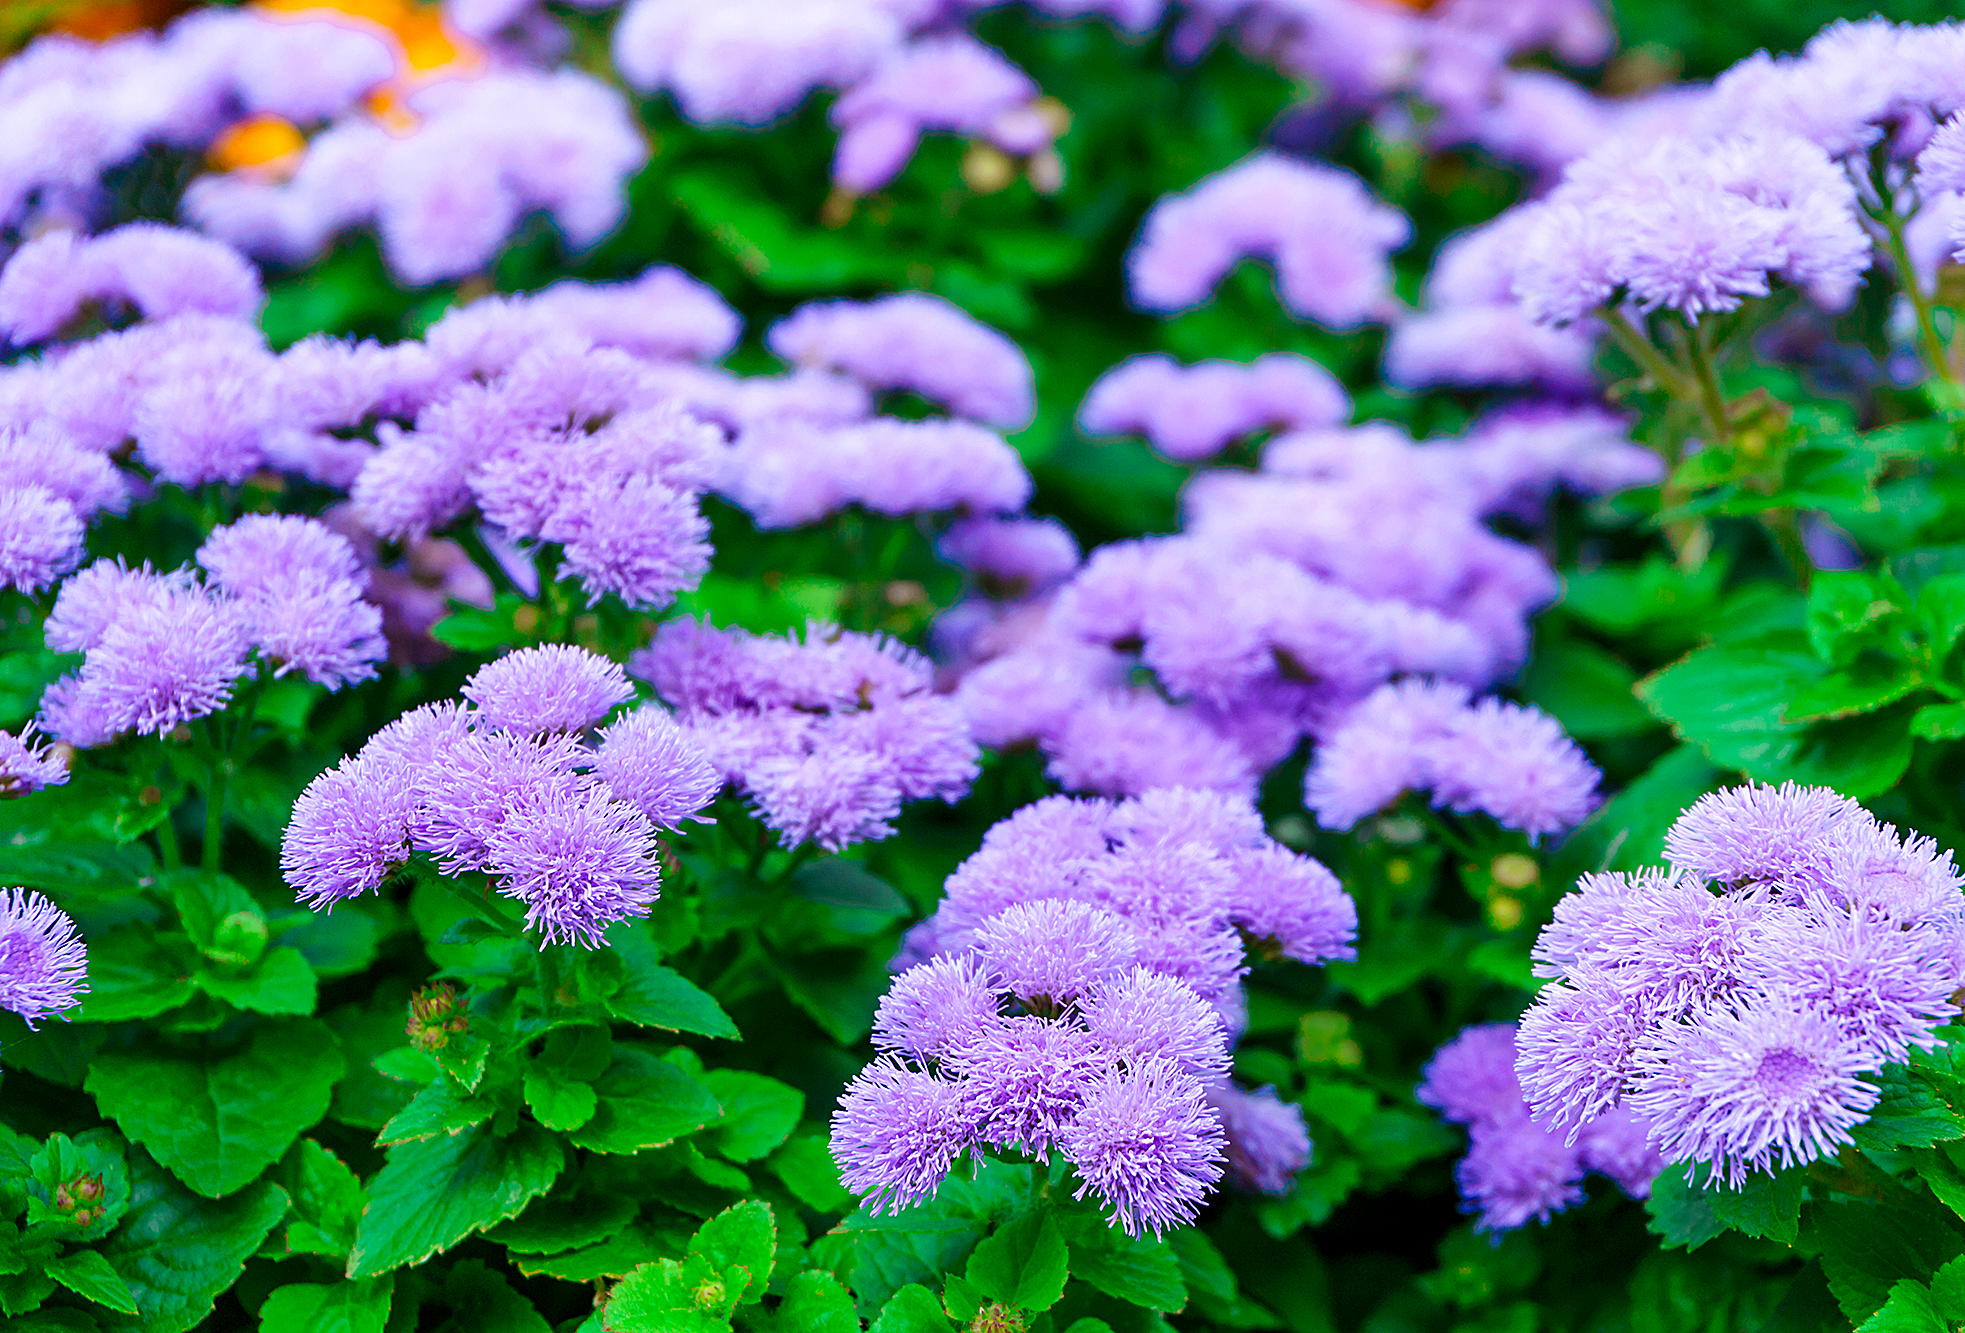 bright blue flowers of Ageratum houstonianum (flossflower) on a blurred leafy background